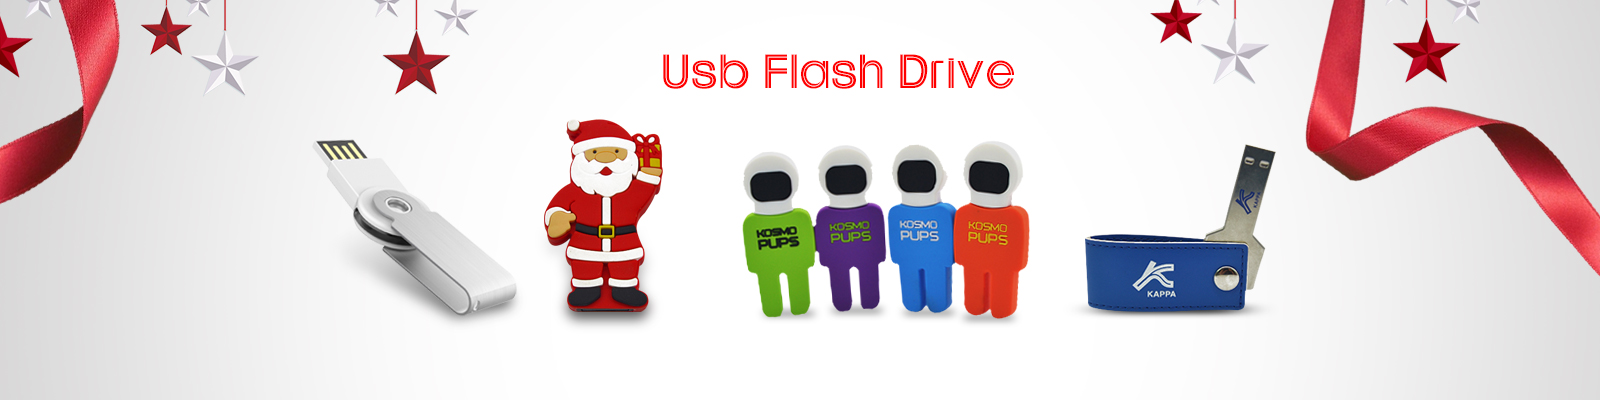 Flash drive | Usb drive | Usb stick | Pendrive | leadway group limited